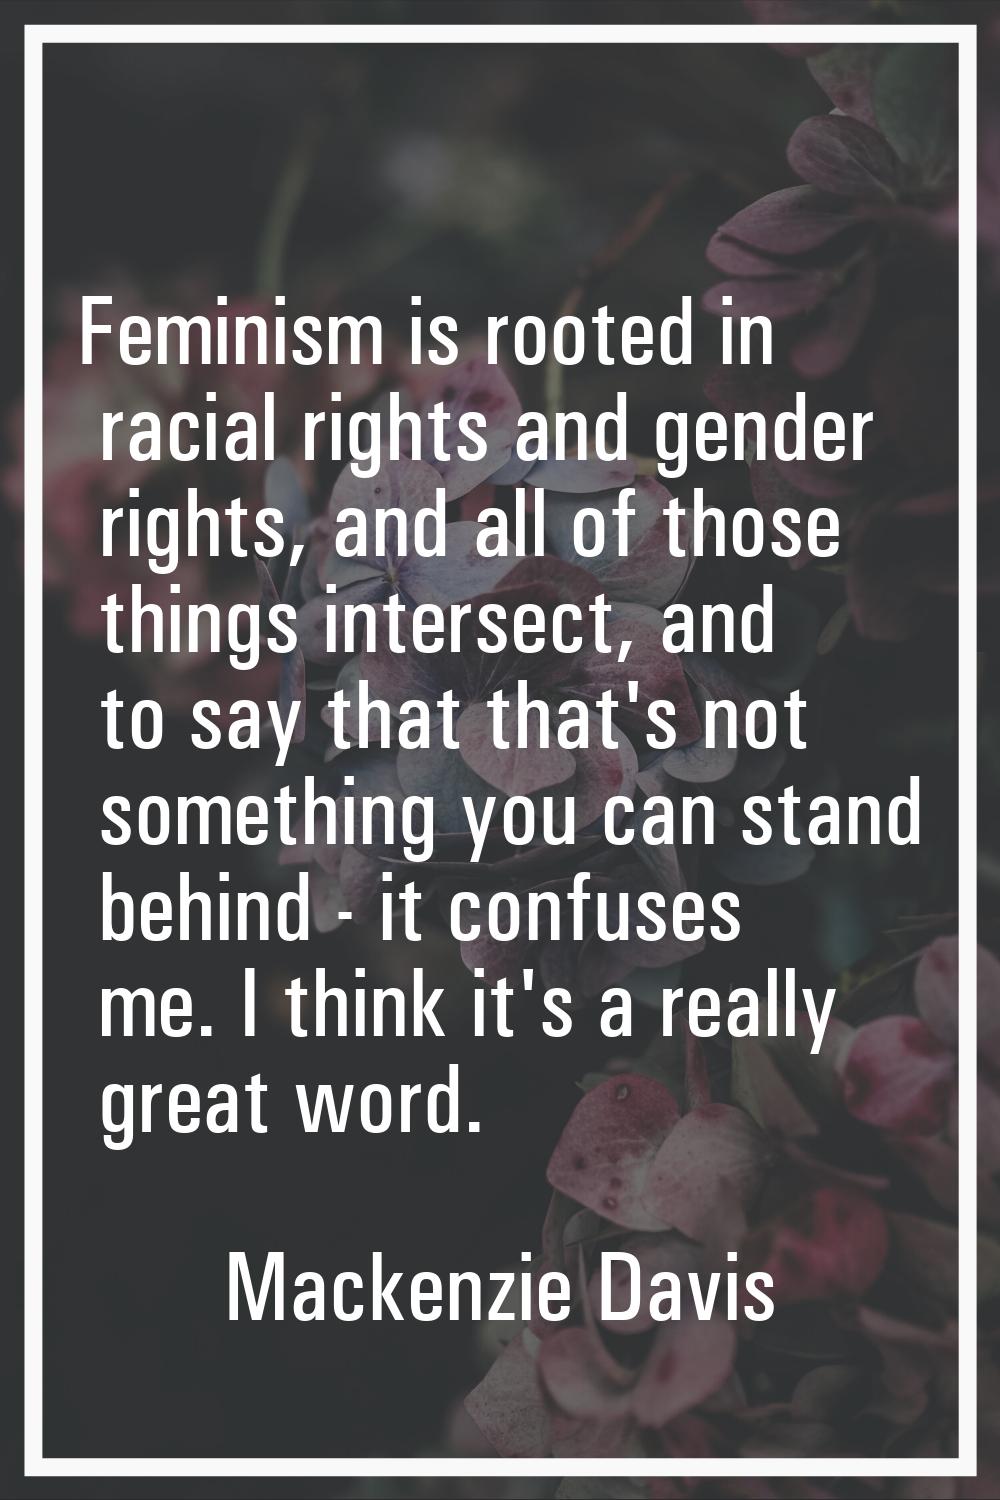 Feminism is rooted in racial rights and gender rights, and all of those things intersect, and to sa